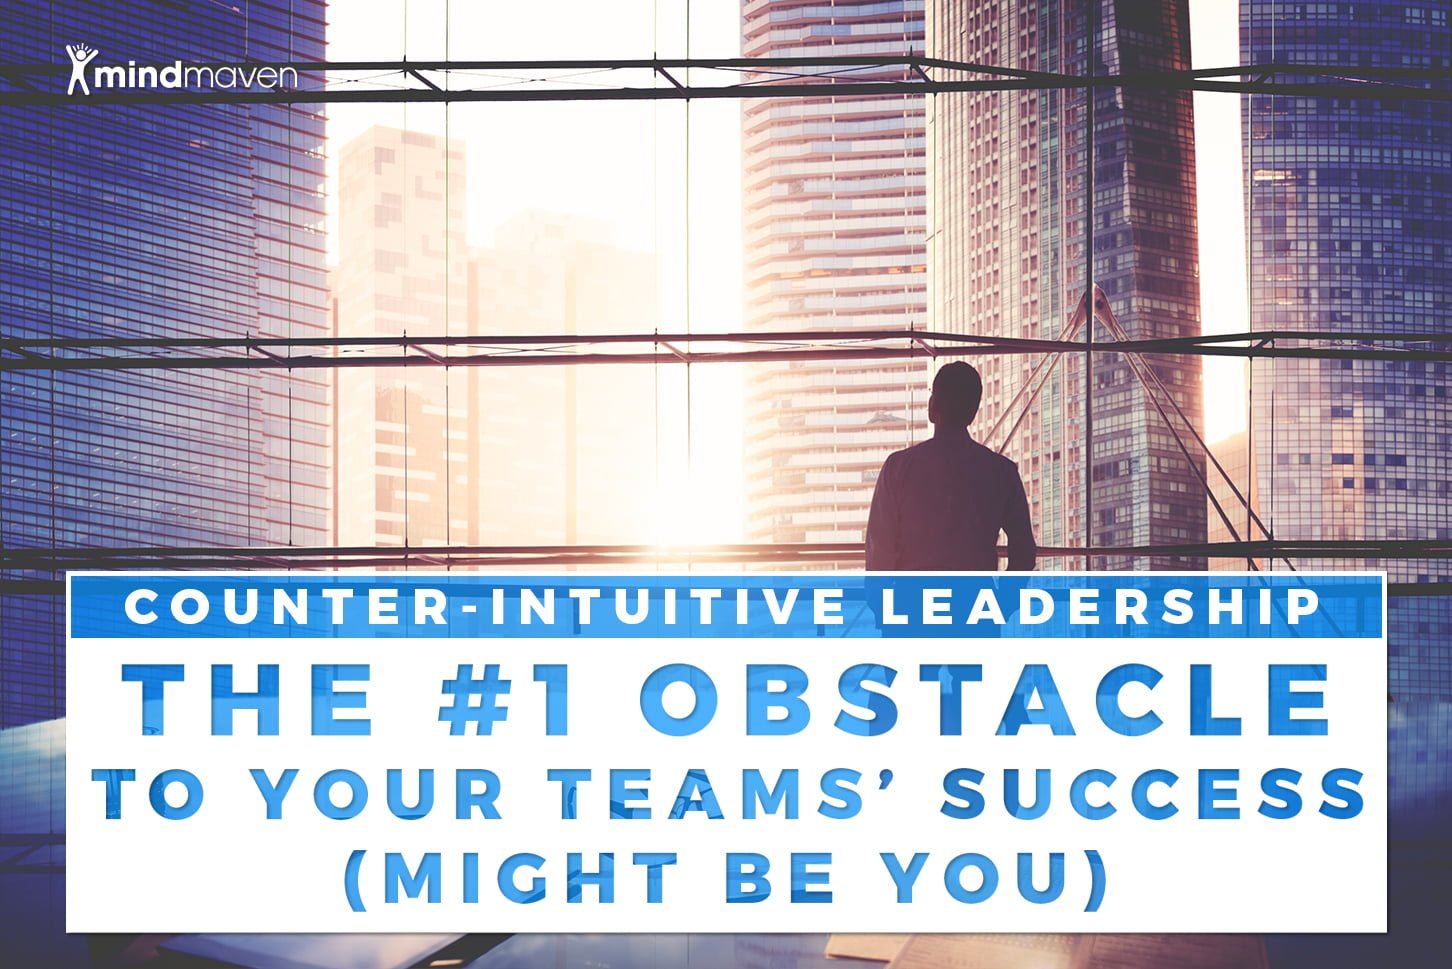 Counter Intuitive Leadership: the #1 obstacle to your team's success.